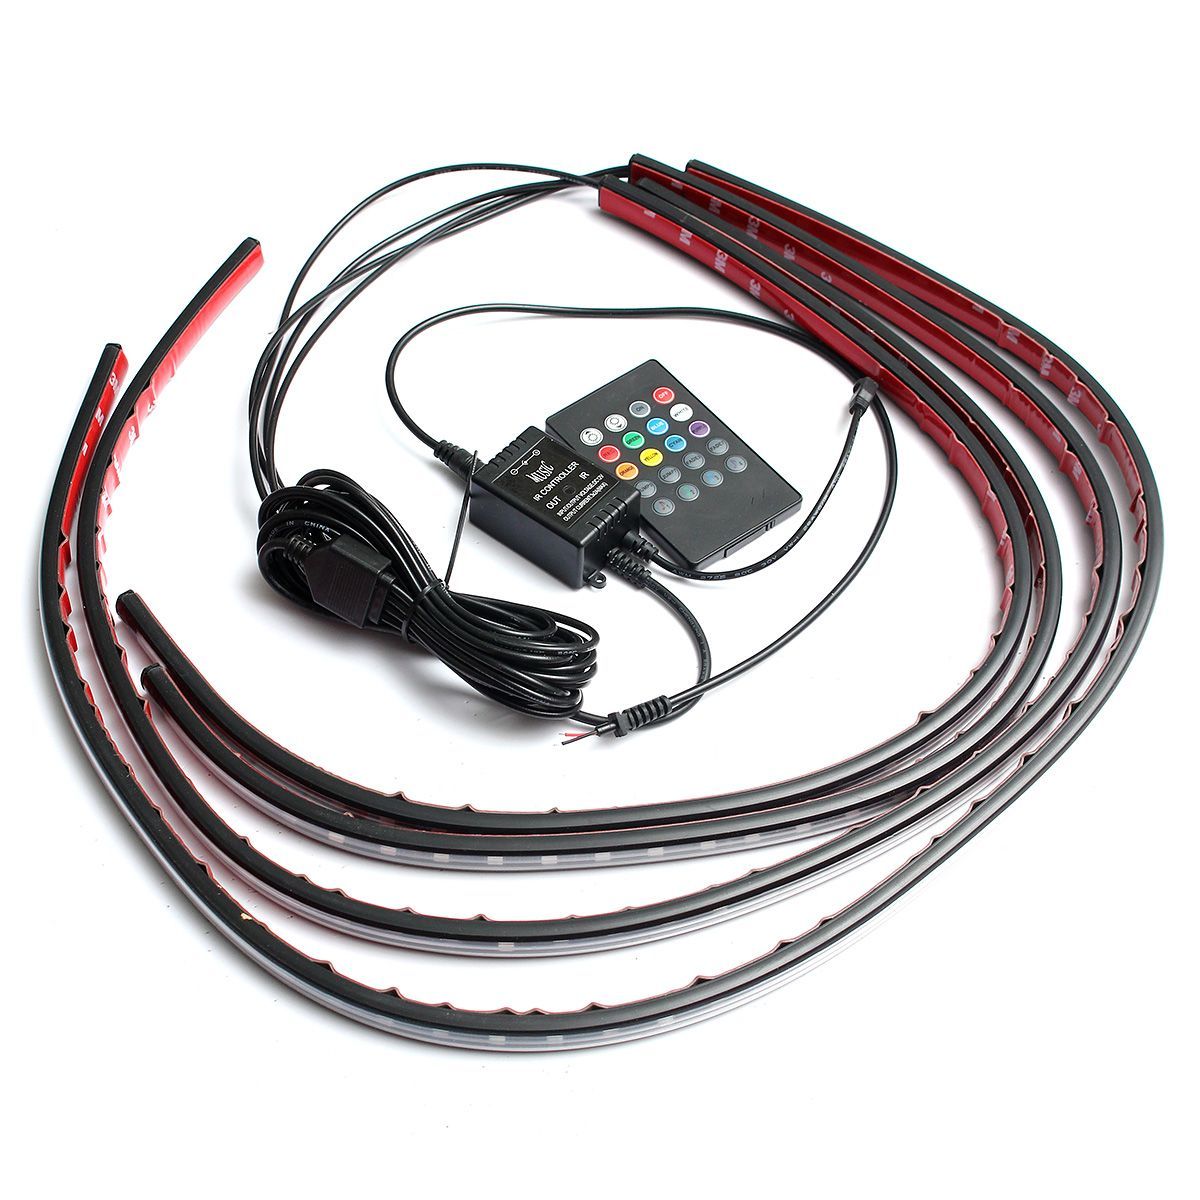 4pcs-Waterproof-RGB-Car-LED-Decoration-Lights-Strip-Underglow-Neon-Lamp-Kit-12V-with-Remote-Control-1342962